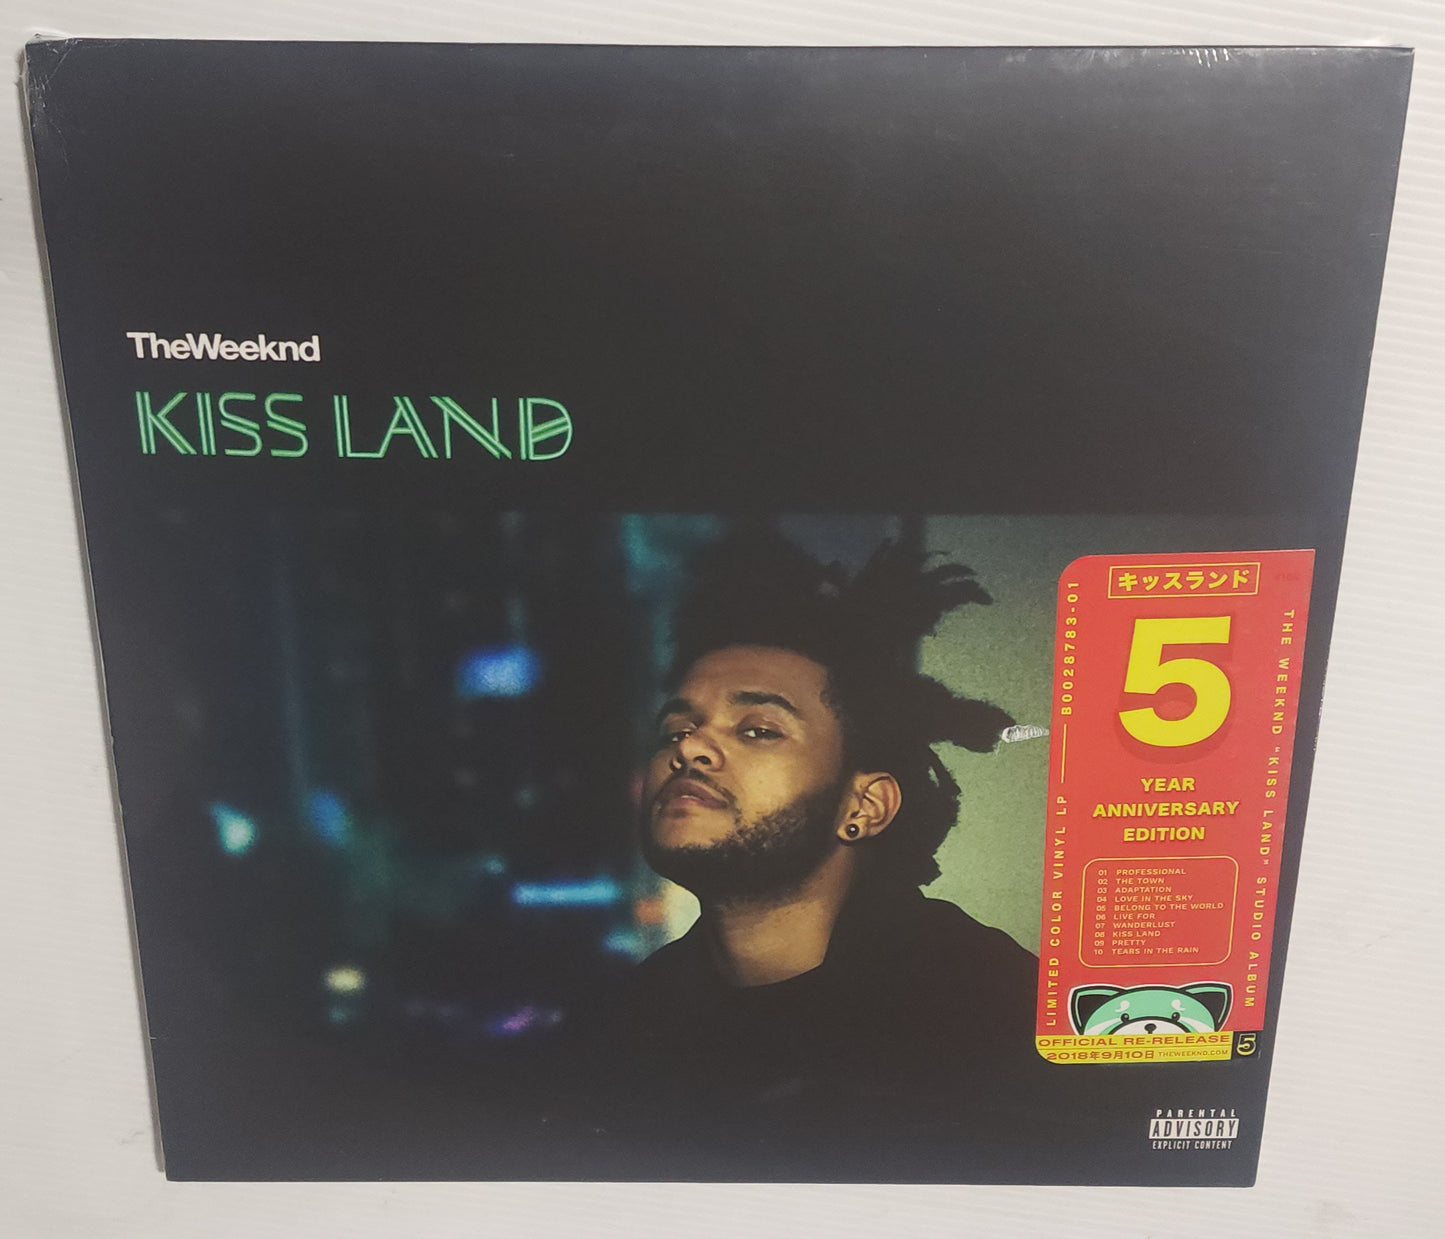 The Weeknd - Kiss Land: 5th Anniversary (2018) (Limited Edition Seaglass Colour Vinyl LP)